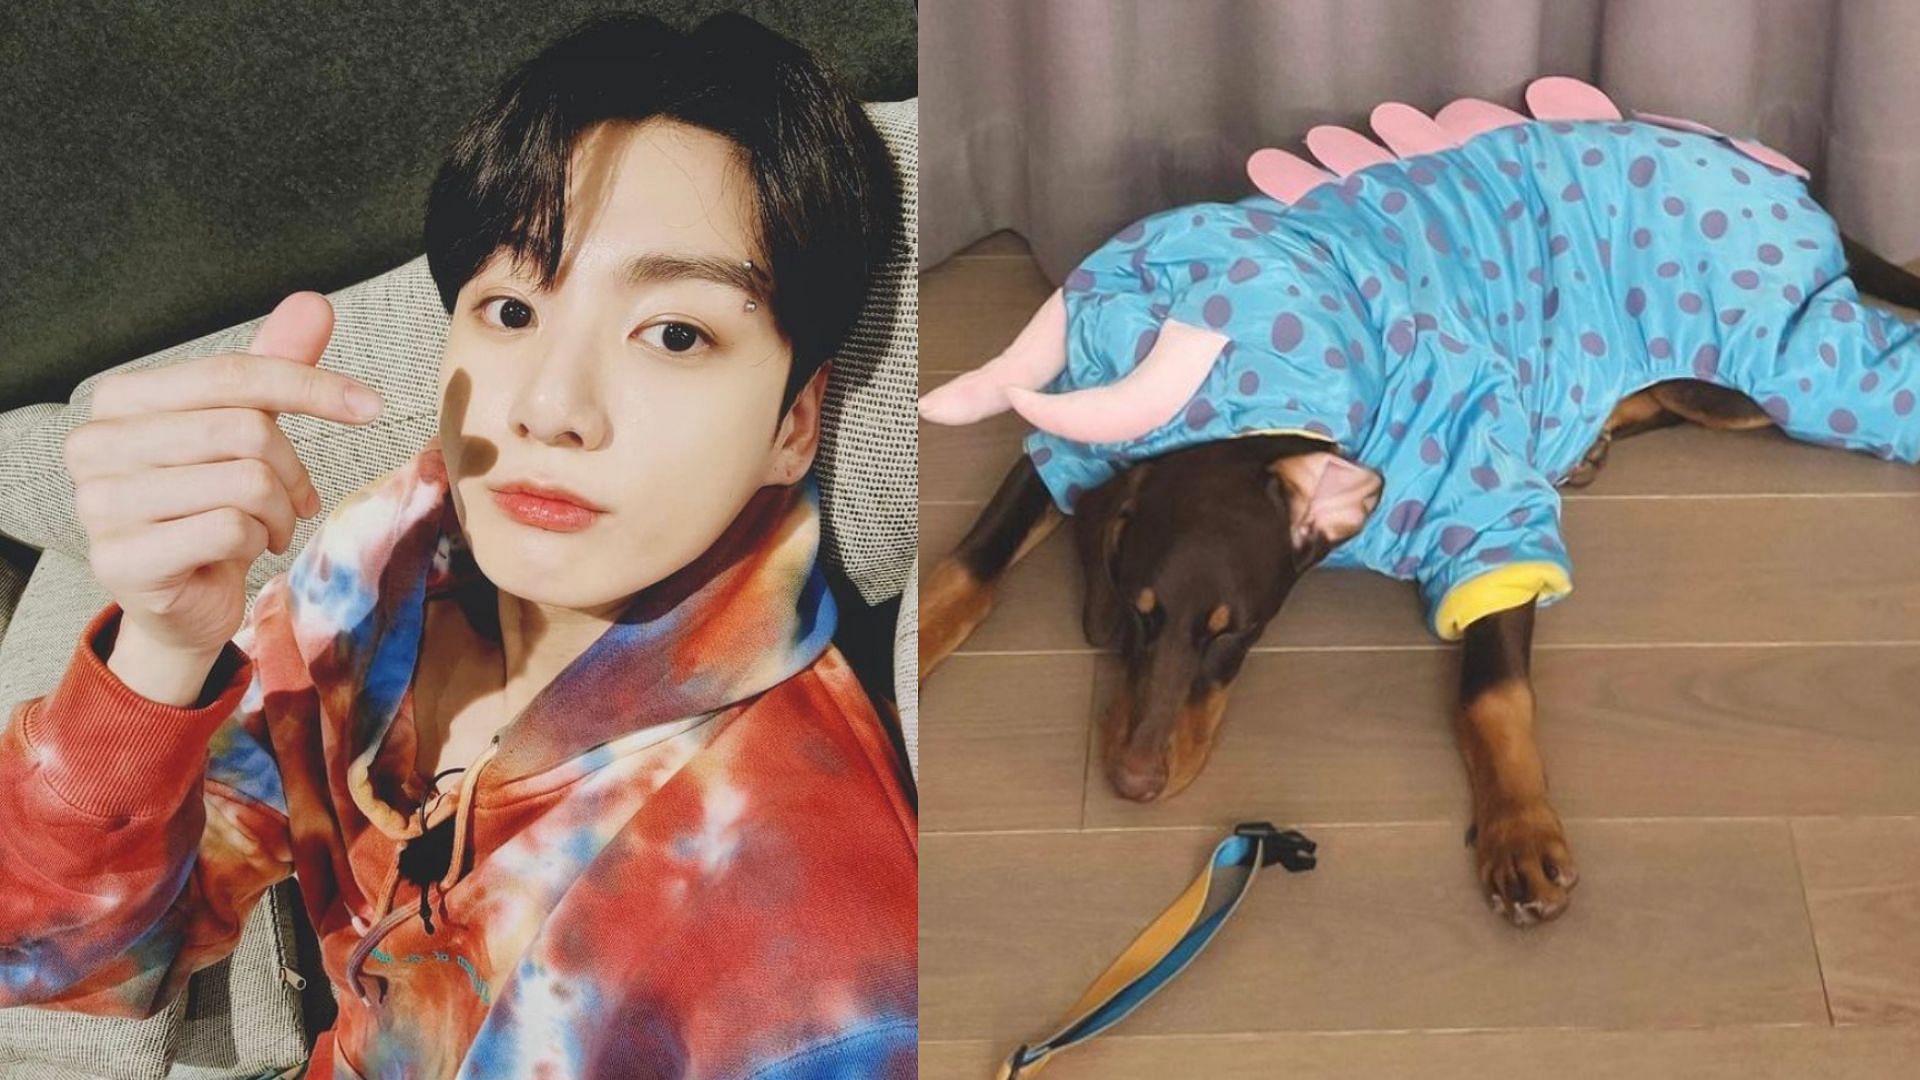 Jungkook&#039;s sweet dog Bam has made ARMYs fall in love with him (Image via @jungkook.97/Instagram)